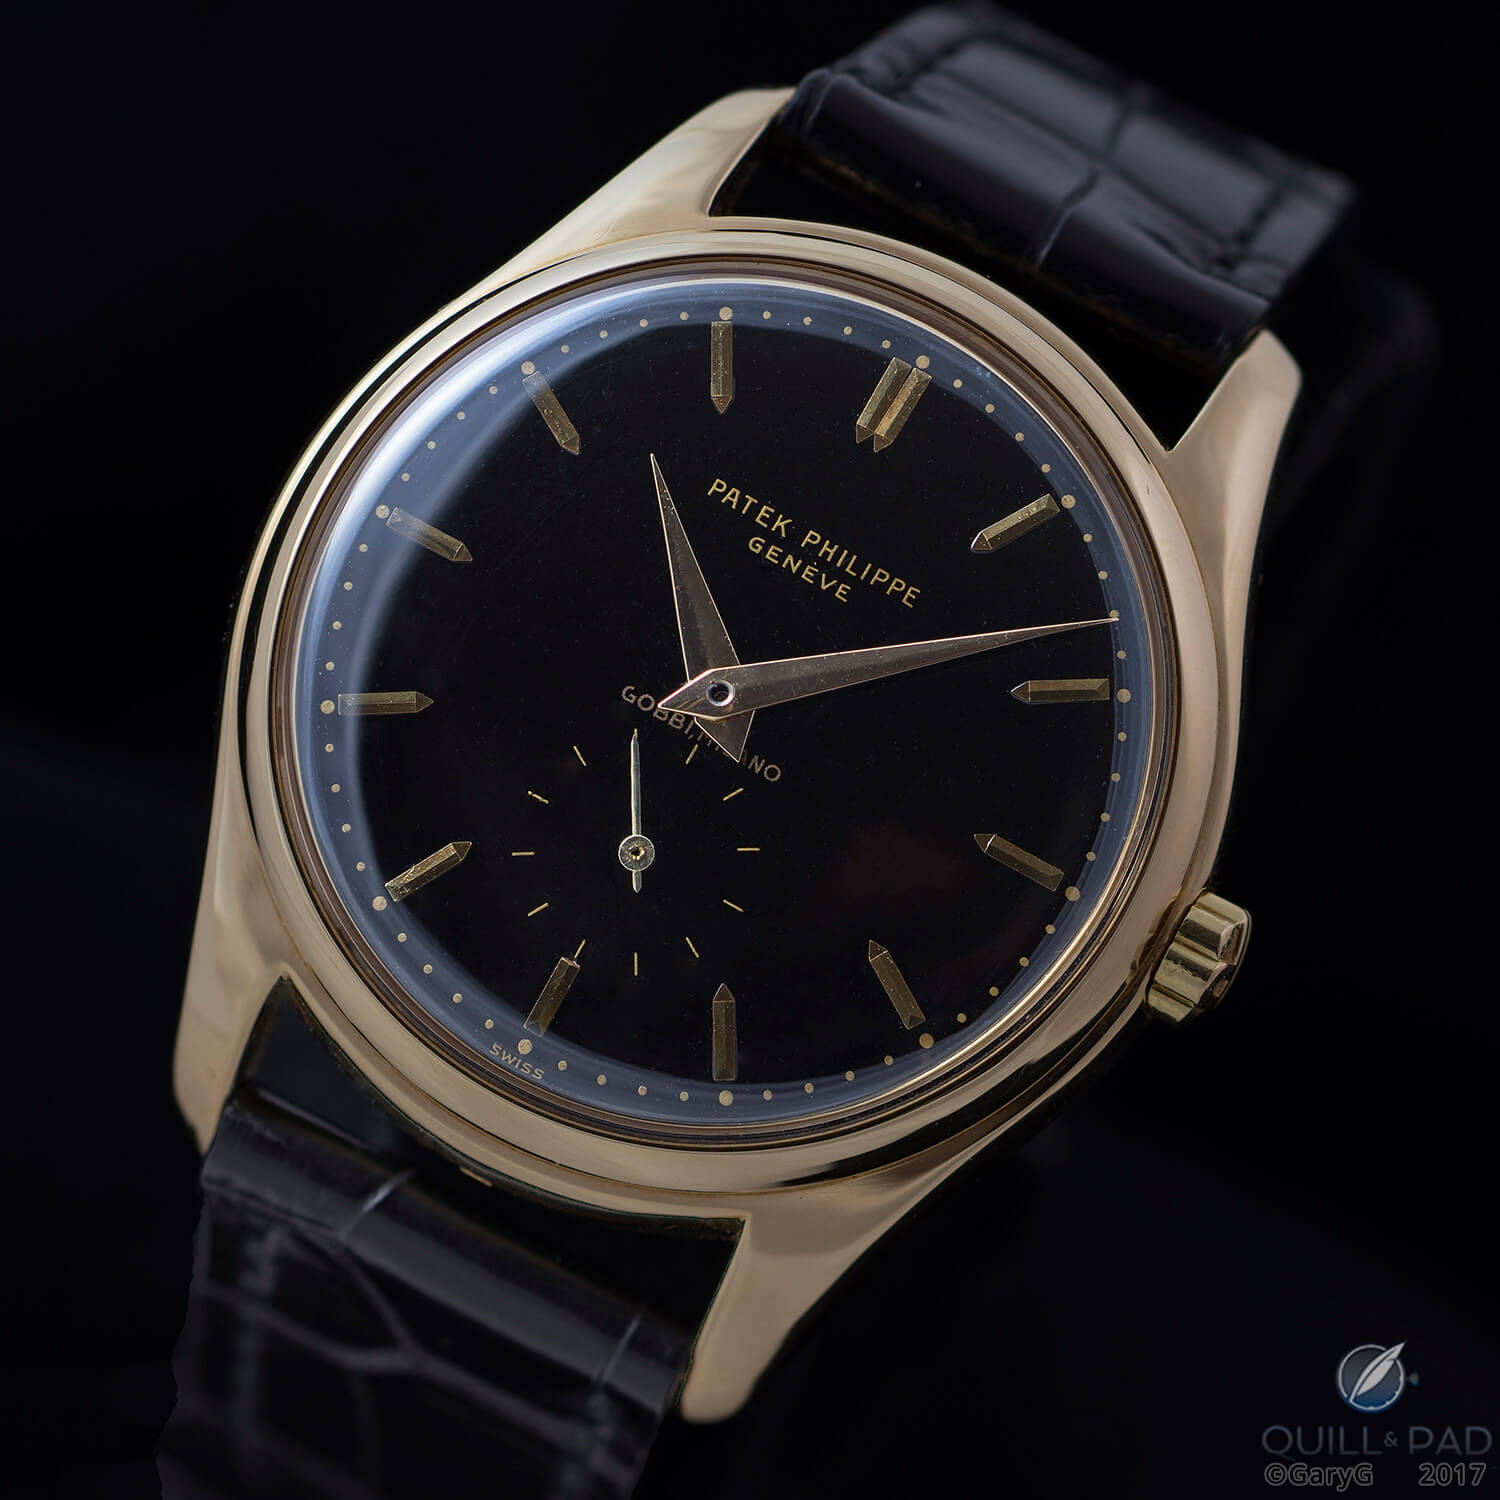 Classic looks: Patek Philippe Reference 2526 with black enamel dial